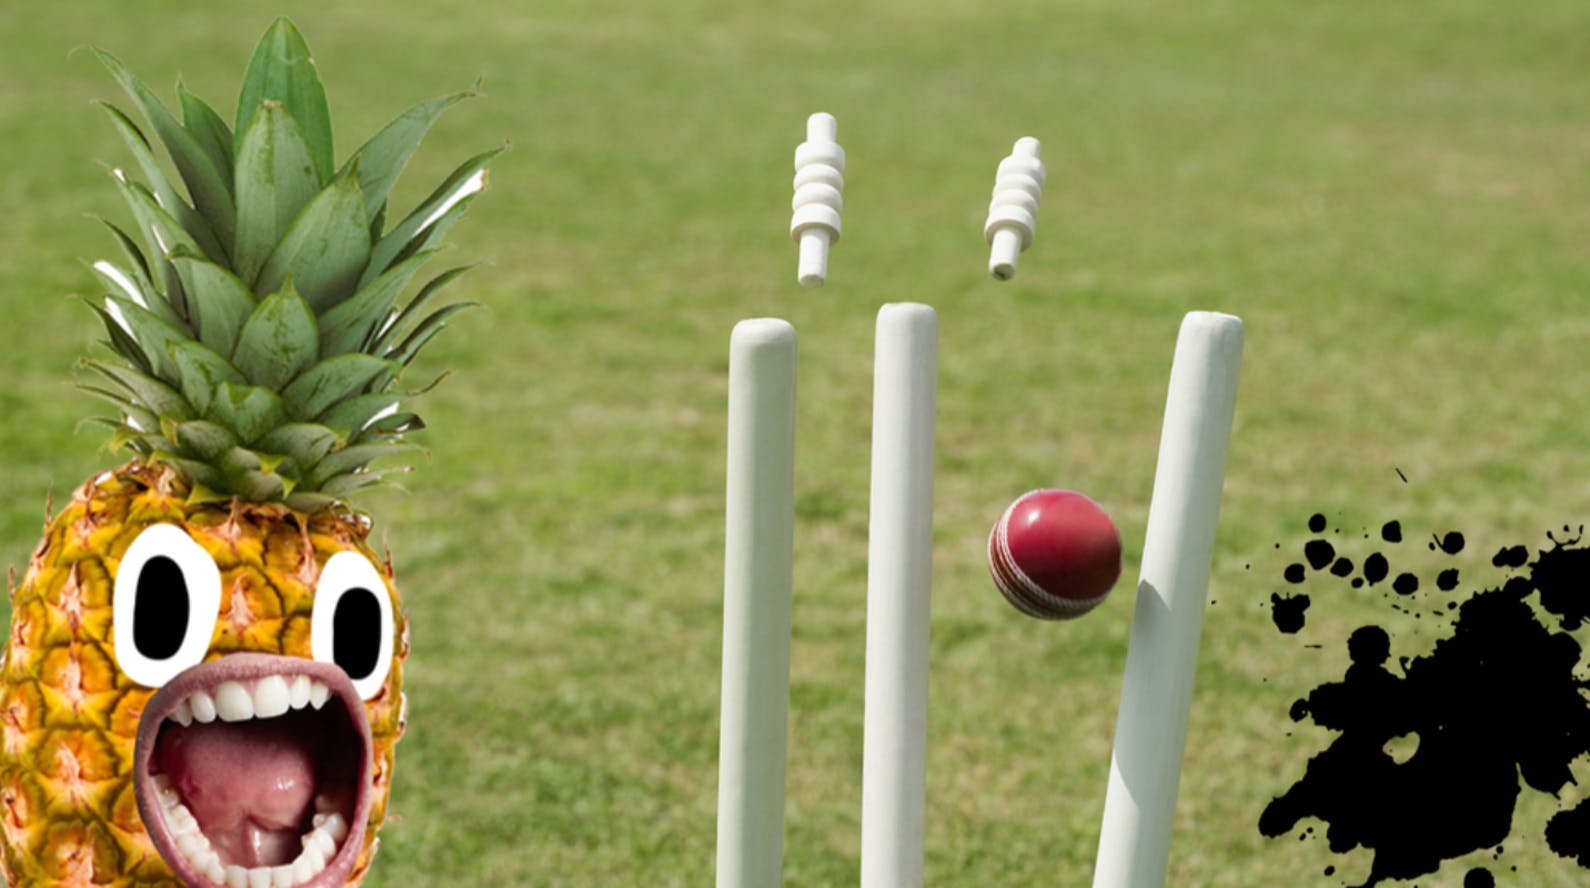 A pineapple witnessing a ball hitting stumps 